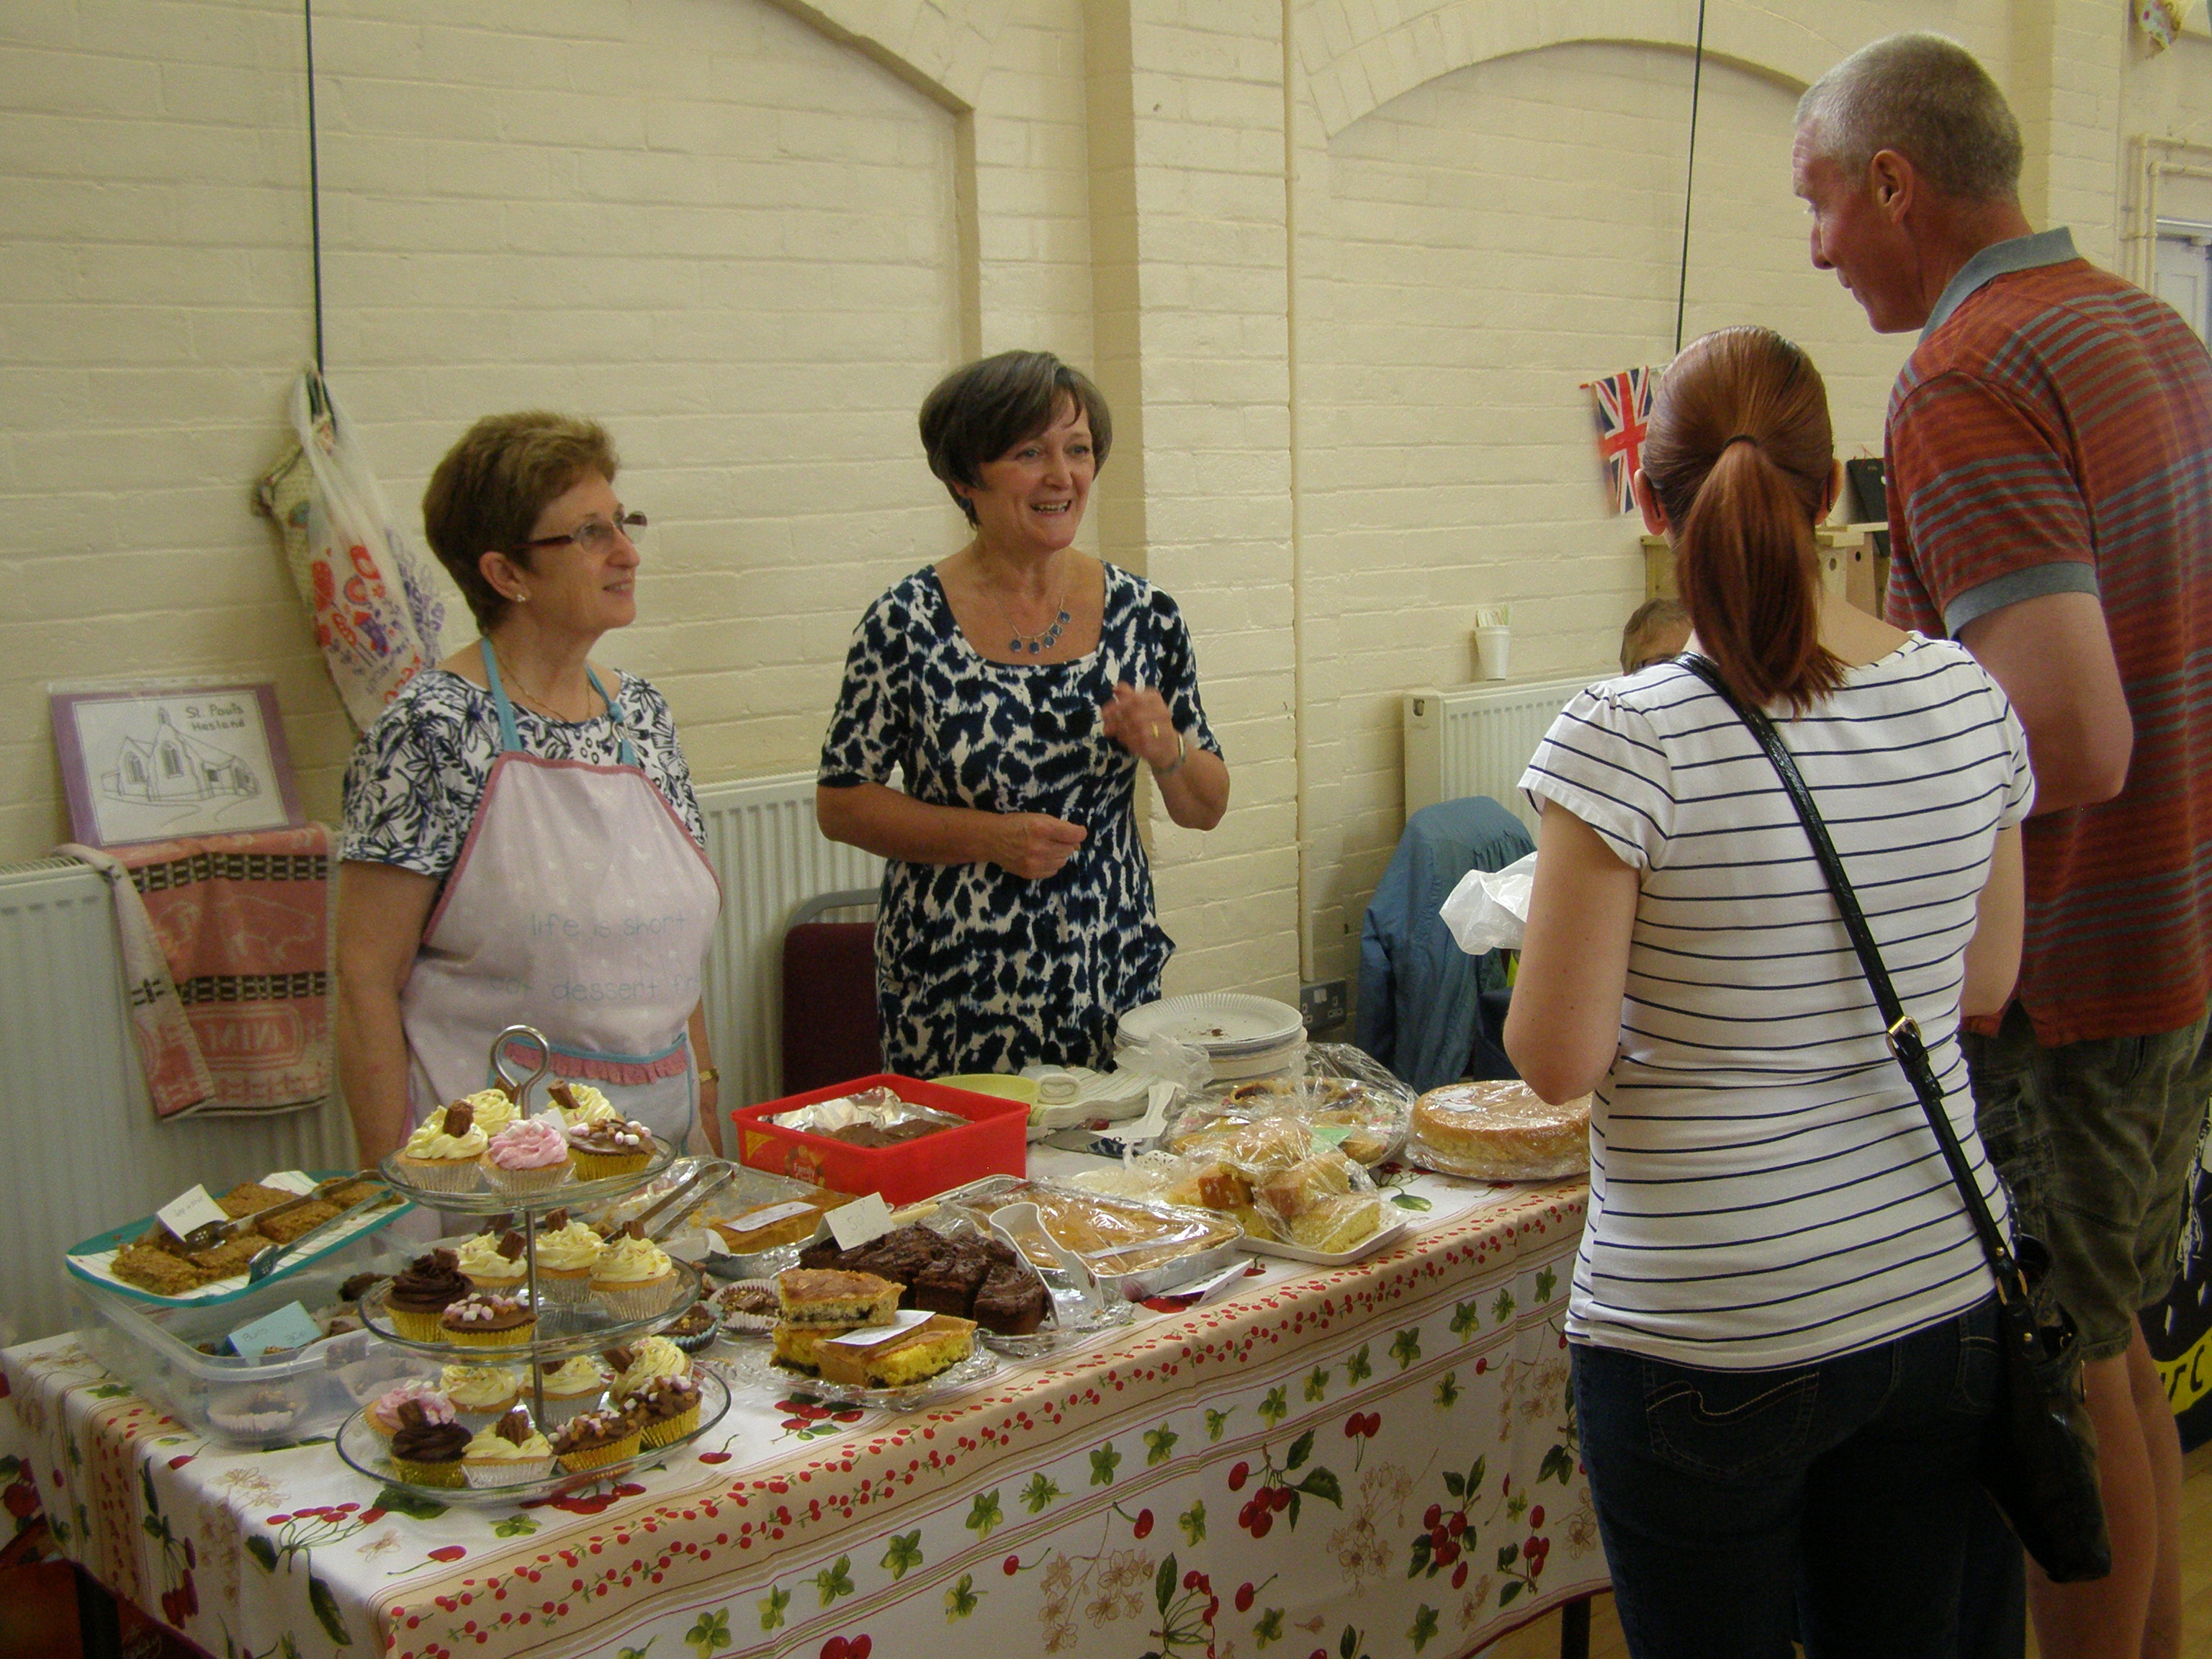 Cake stall provided by a local group.